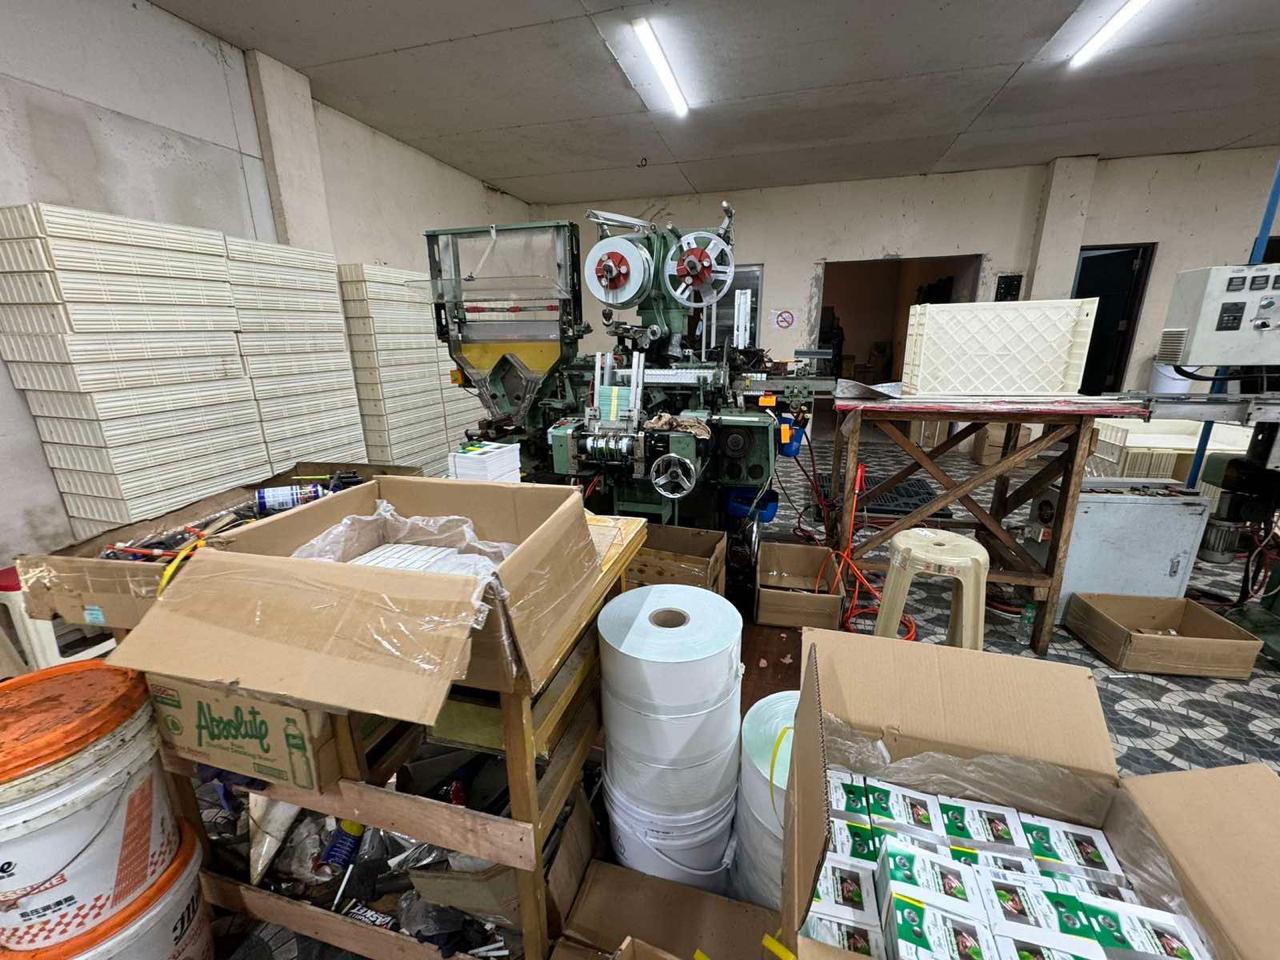 In a major crackdown on the illegal cigarette trade, authorities seized 3.12 million packs of counterfeit cigarettes worth P358 million during raids in Dasmarinas City and Indang, Cavite.